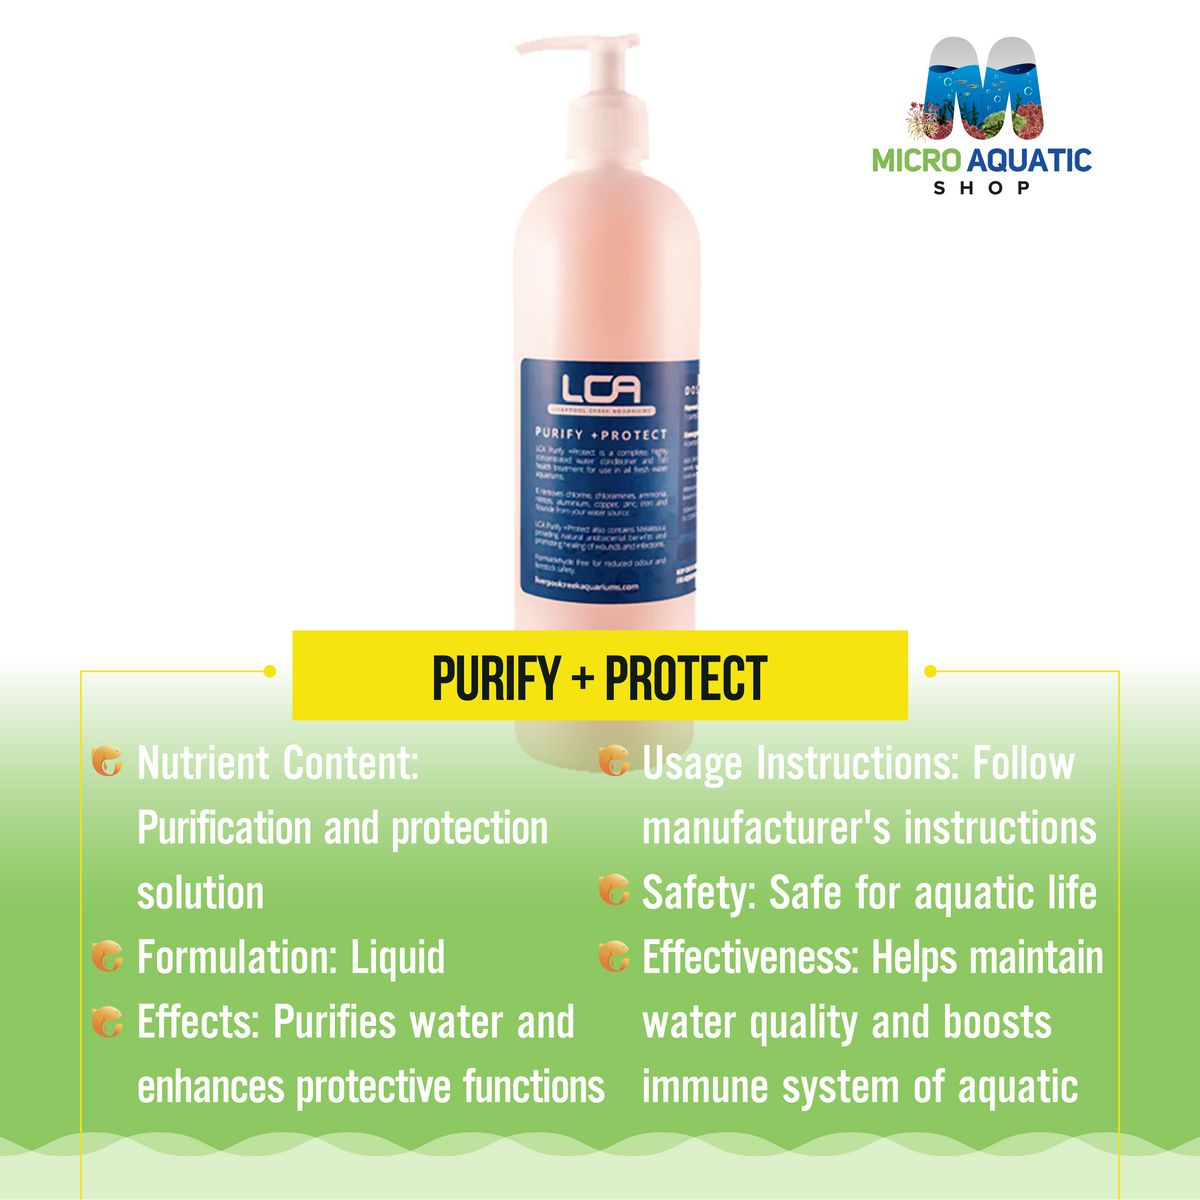 Purify +Protect